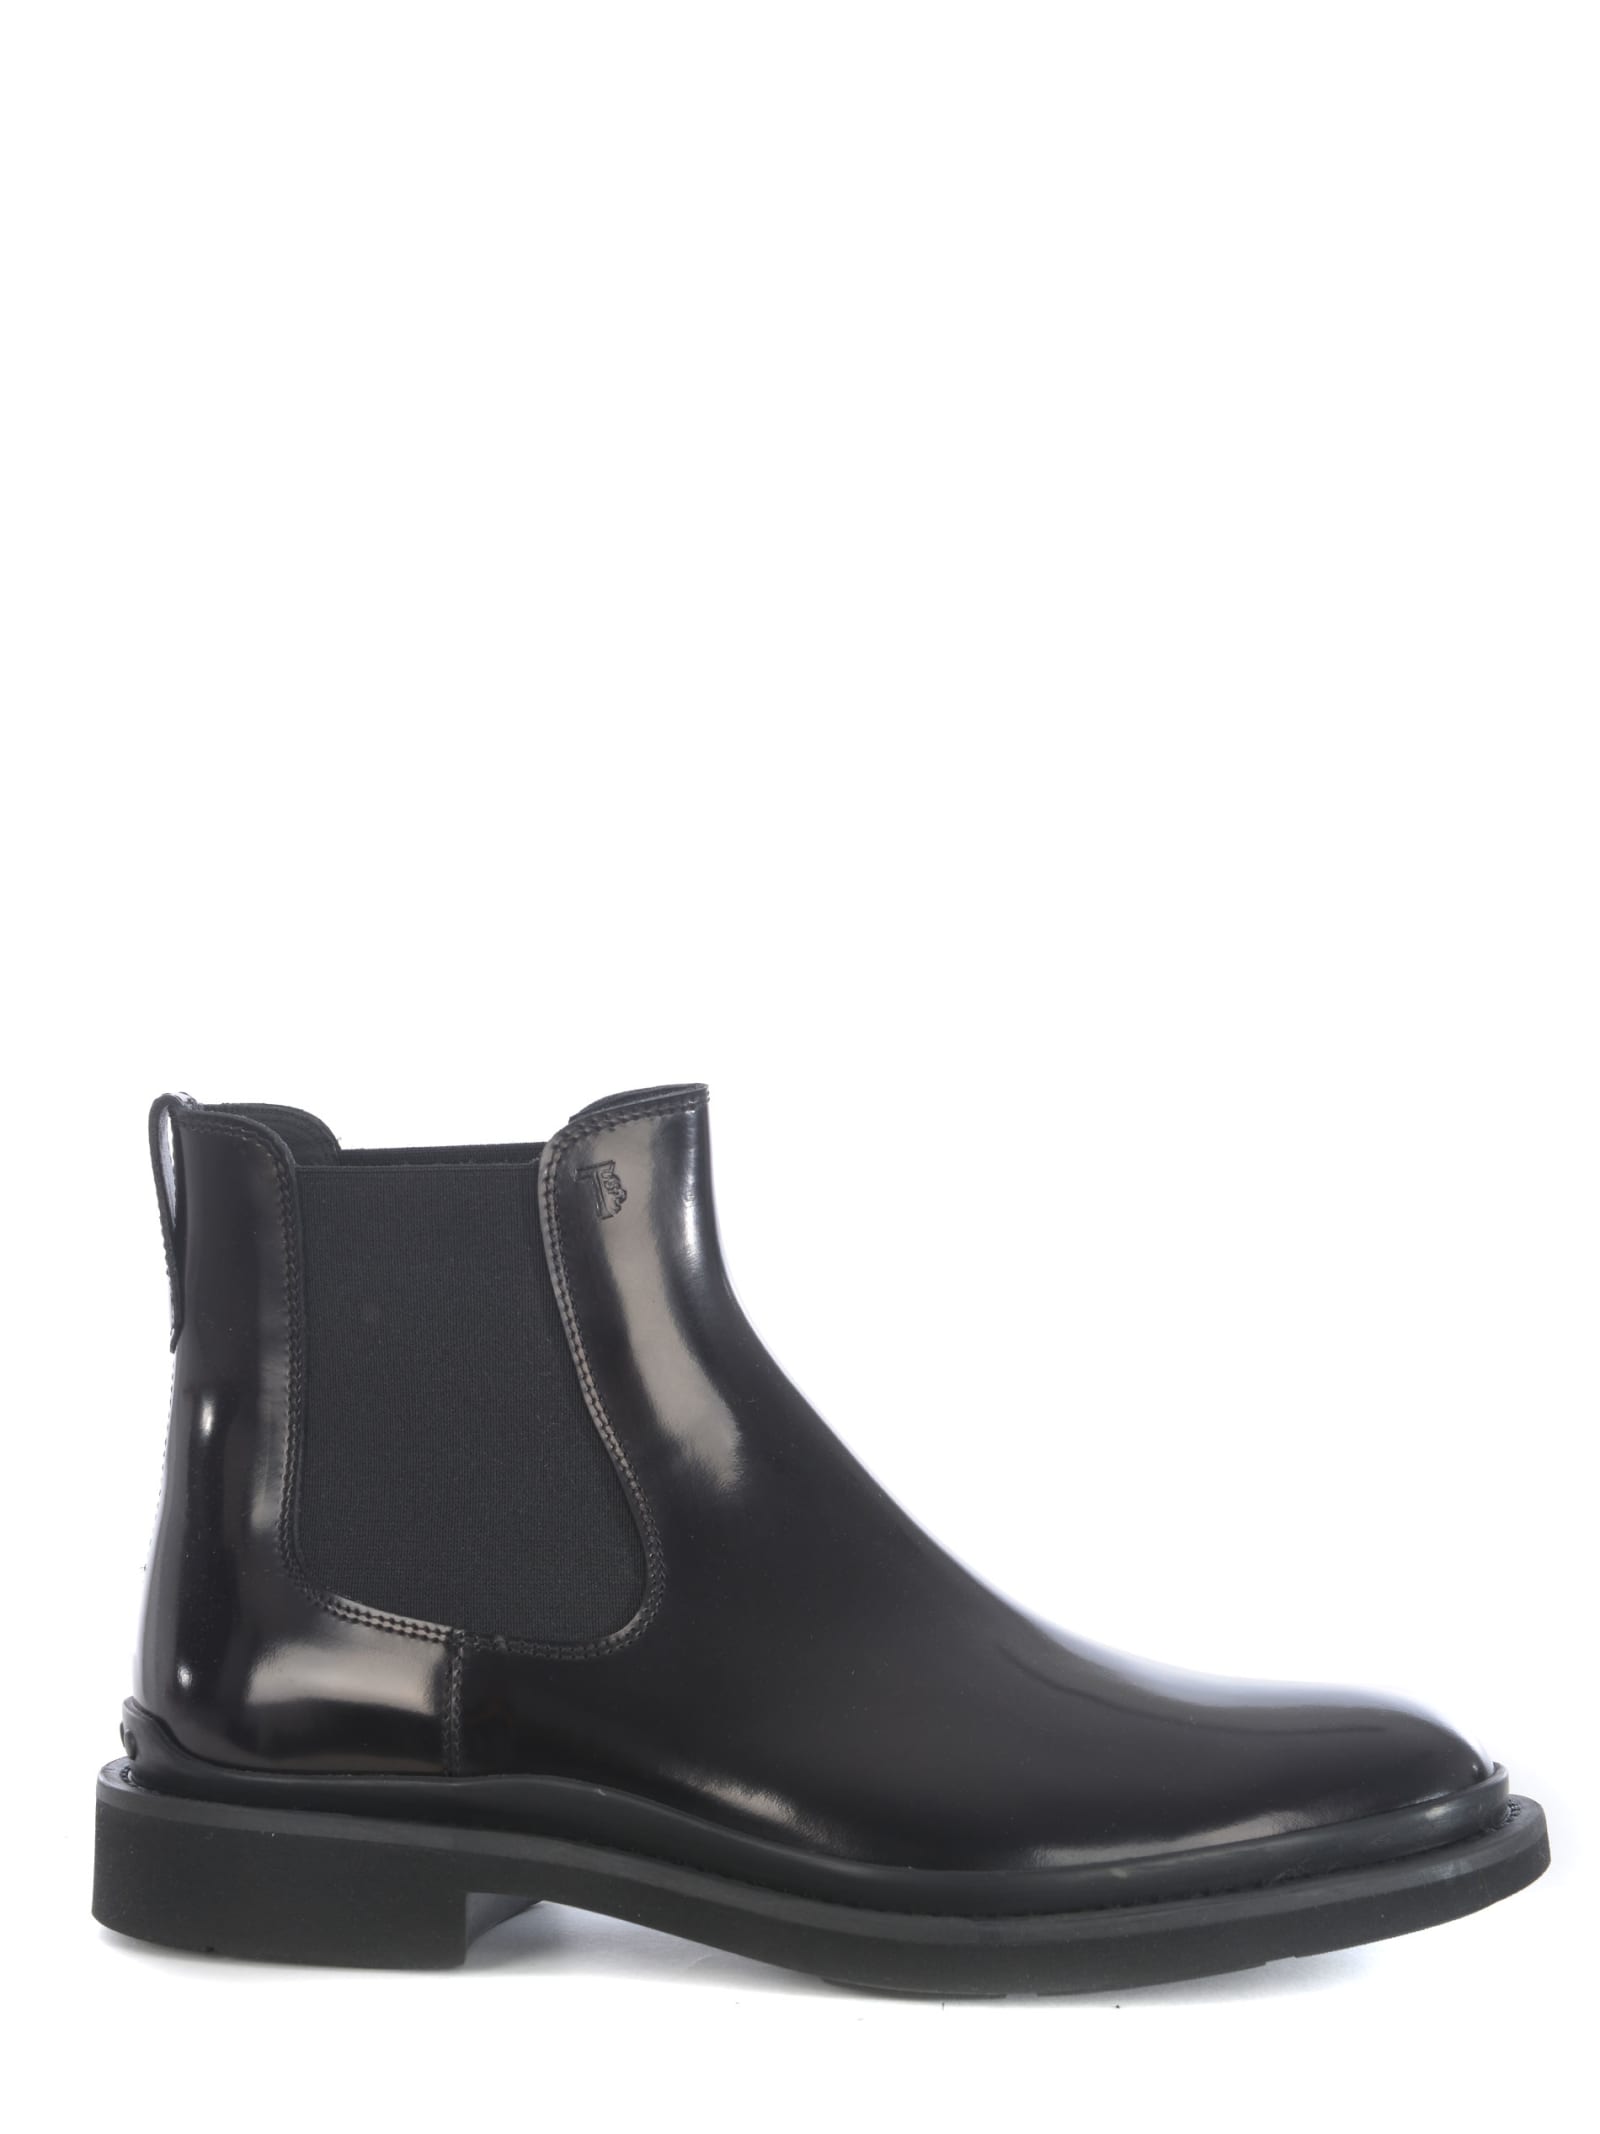 Tods Ankle Boots In Shiny Leather